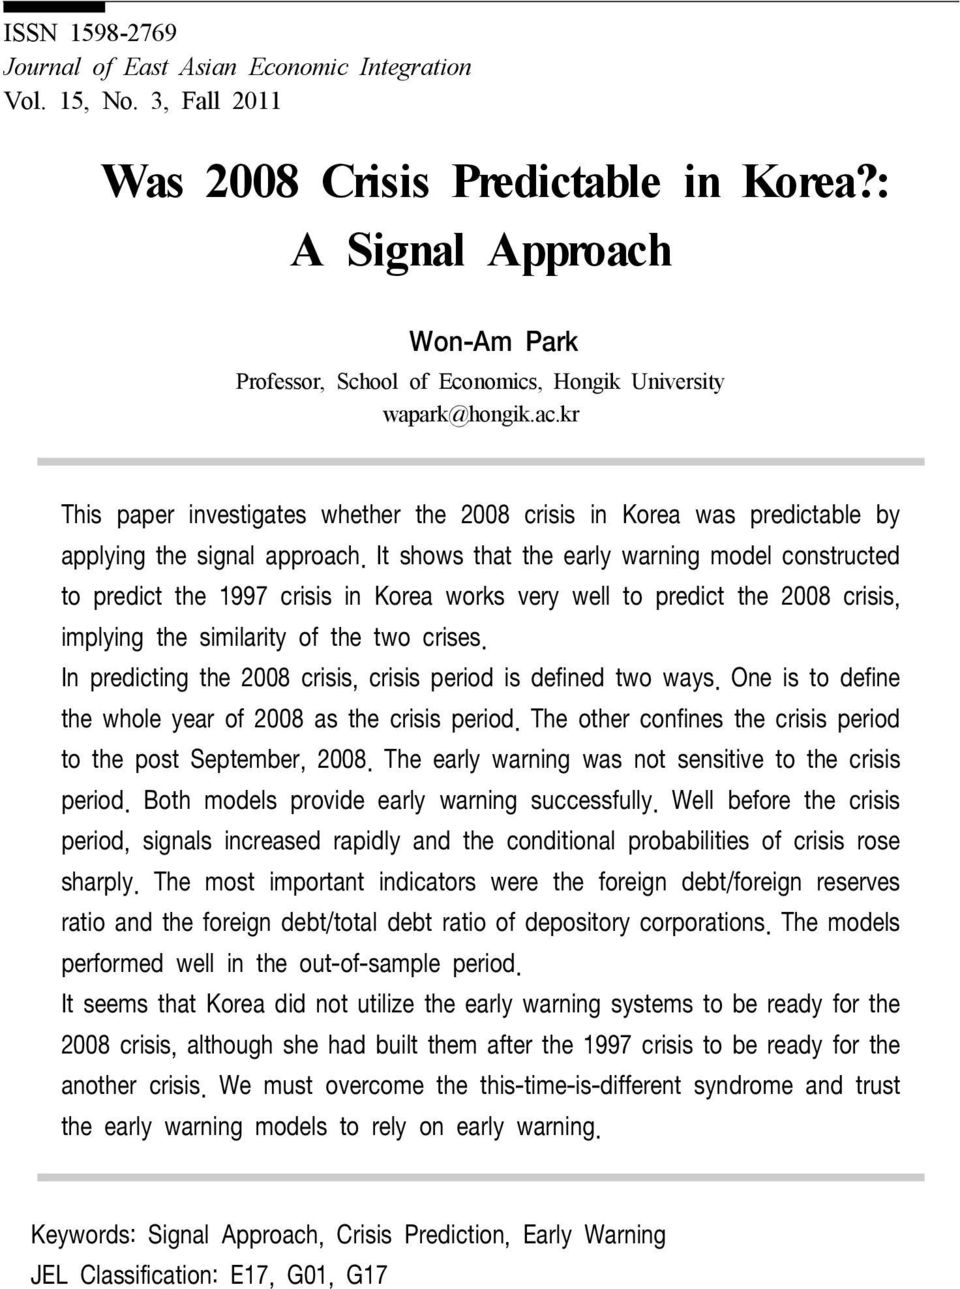 It shows that the early warning model constructed to predict the 1997 crisis in Korea works very well to predict the 2008 crisis, implying the similarity of the two crises.